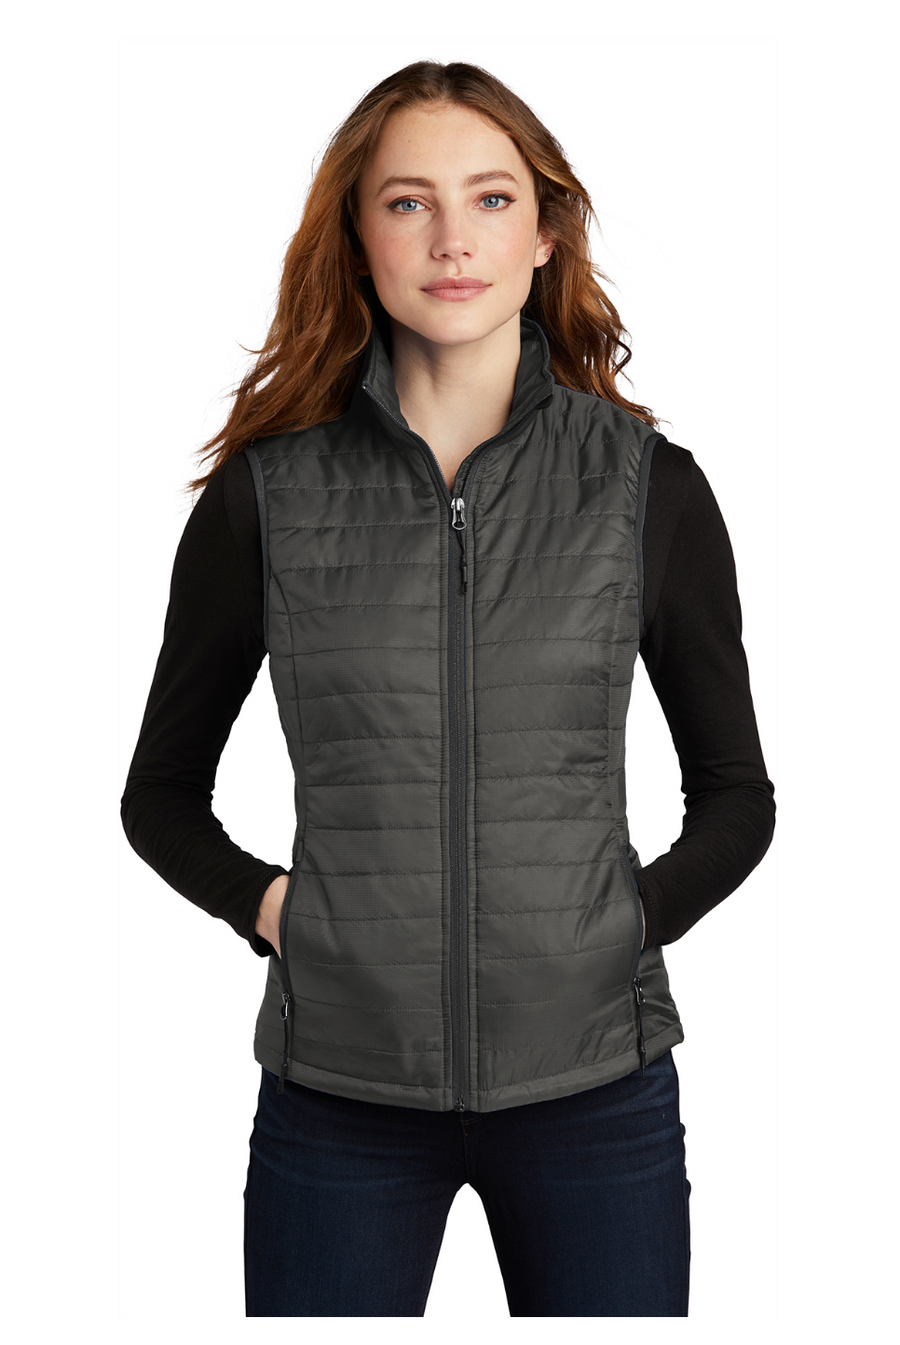 Authority Port Authority Ladies Packable Puffy Vest (Preorder)